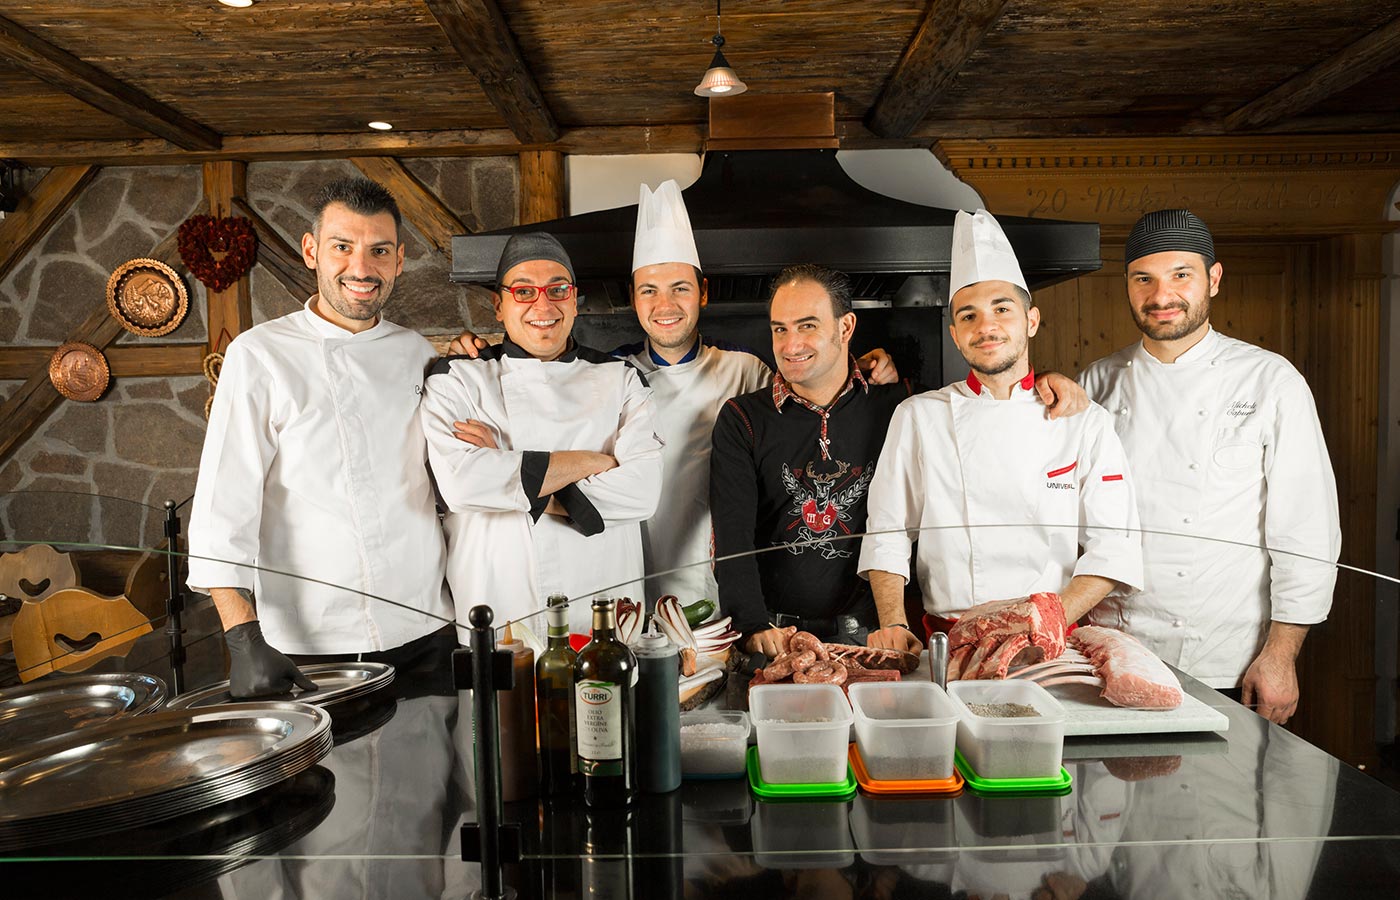 Group picture of the team of restaurant Miky's Grill's kitchen